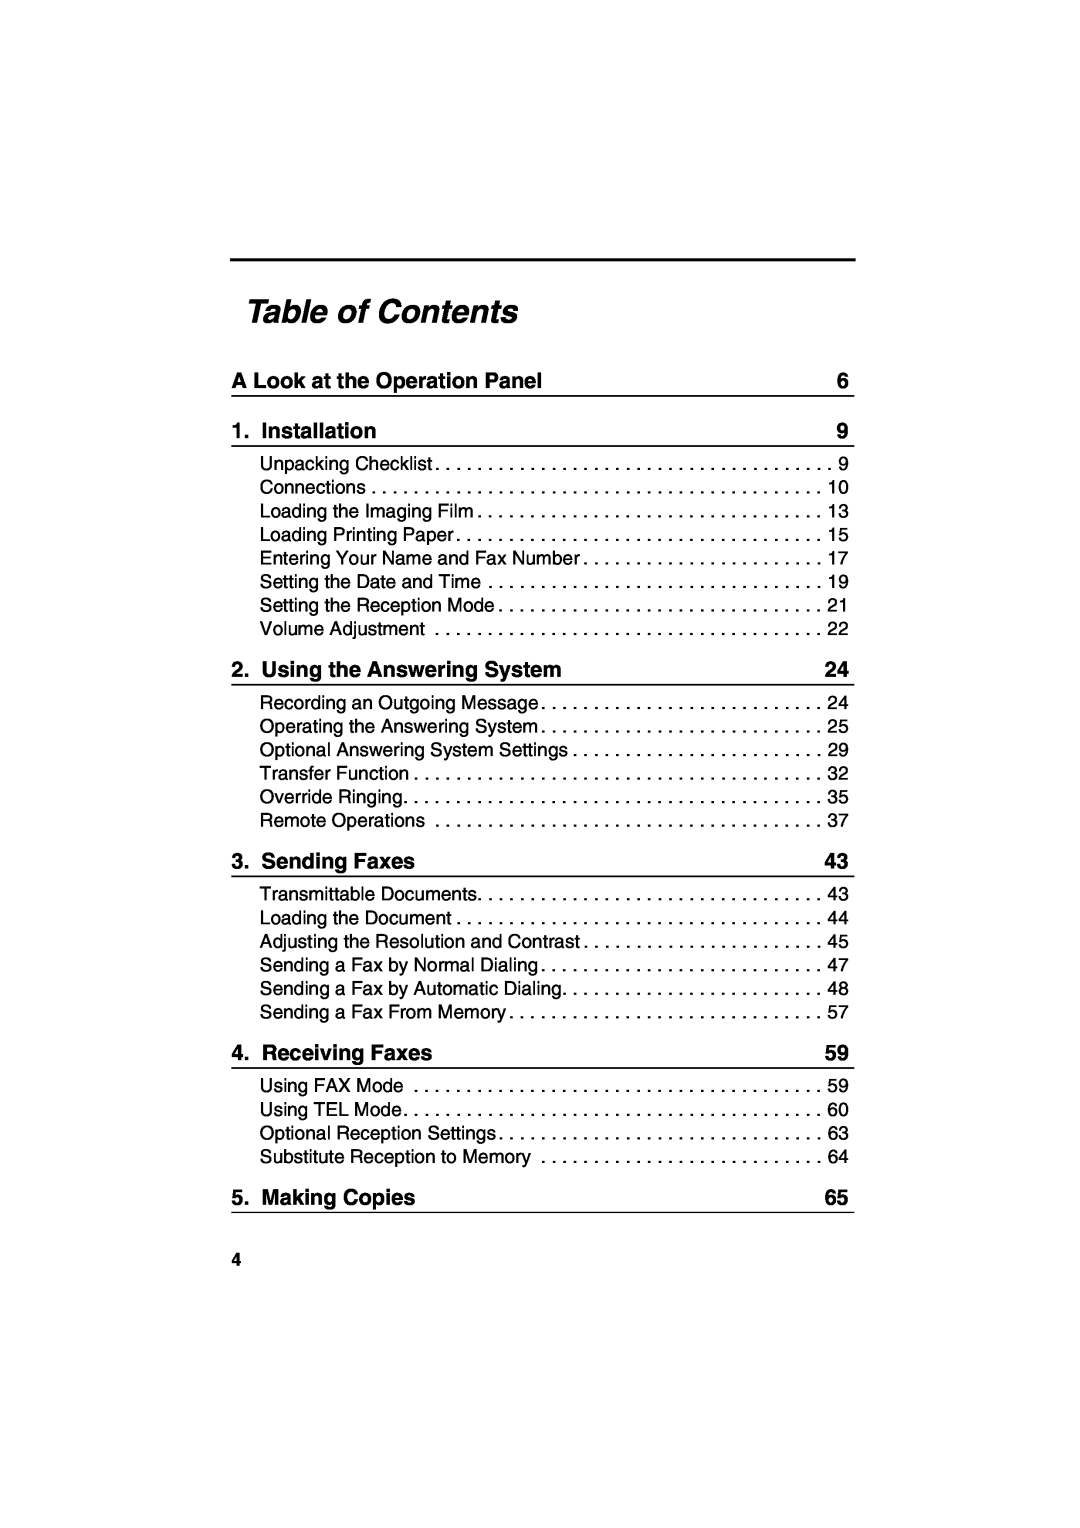 Sharp UX-A260 Table of Contents, A Look at the Operation Panel, Installation, Using the Answering System, Sending Faxes 